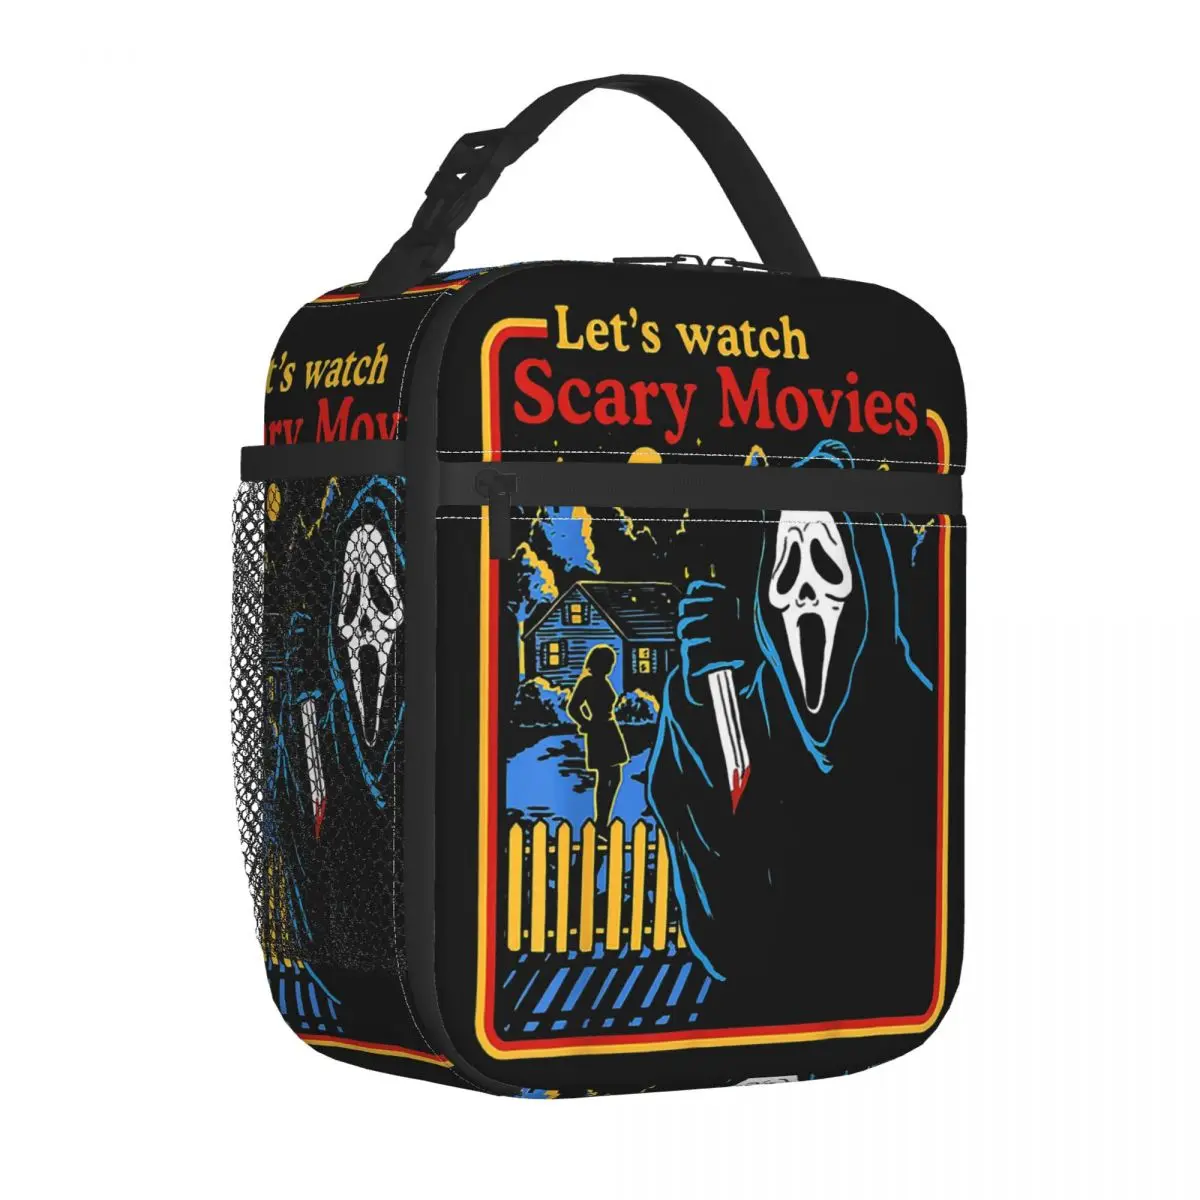 Screaming Ghostface Scream Watch Insulated Lunch Bag Horror Scary Movies Lunch Container Multifunction Thermal Cooler Bento Box